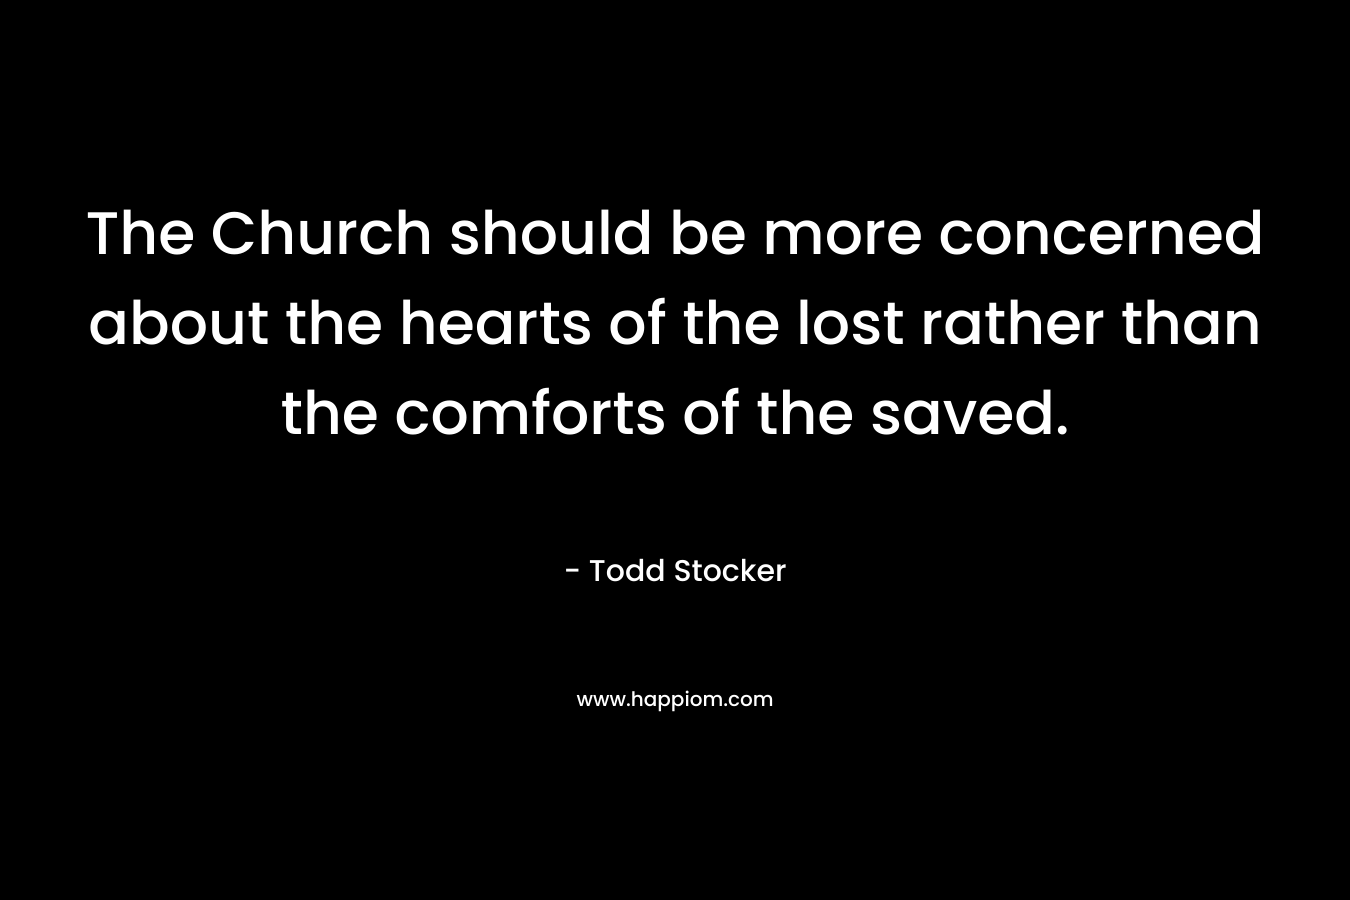 The Church should be more concerned about the hearts of the lost rather than the comforts of the saved.